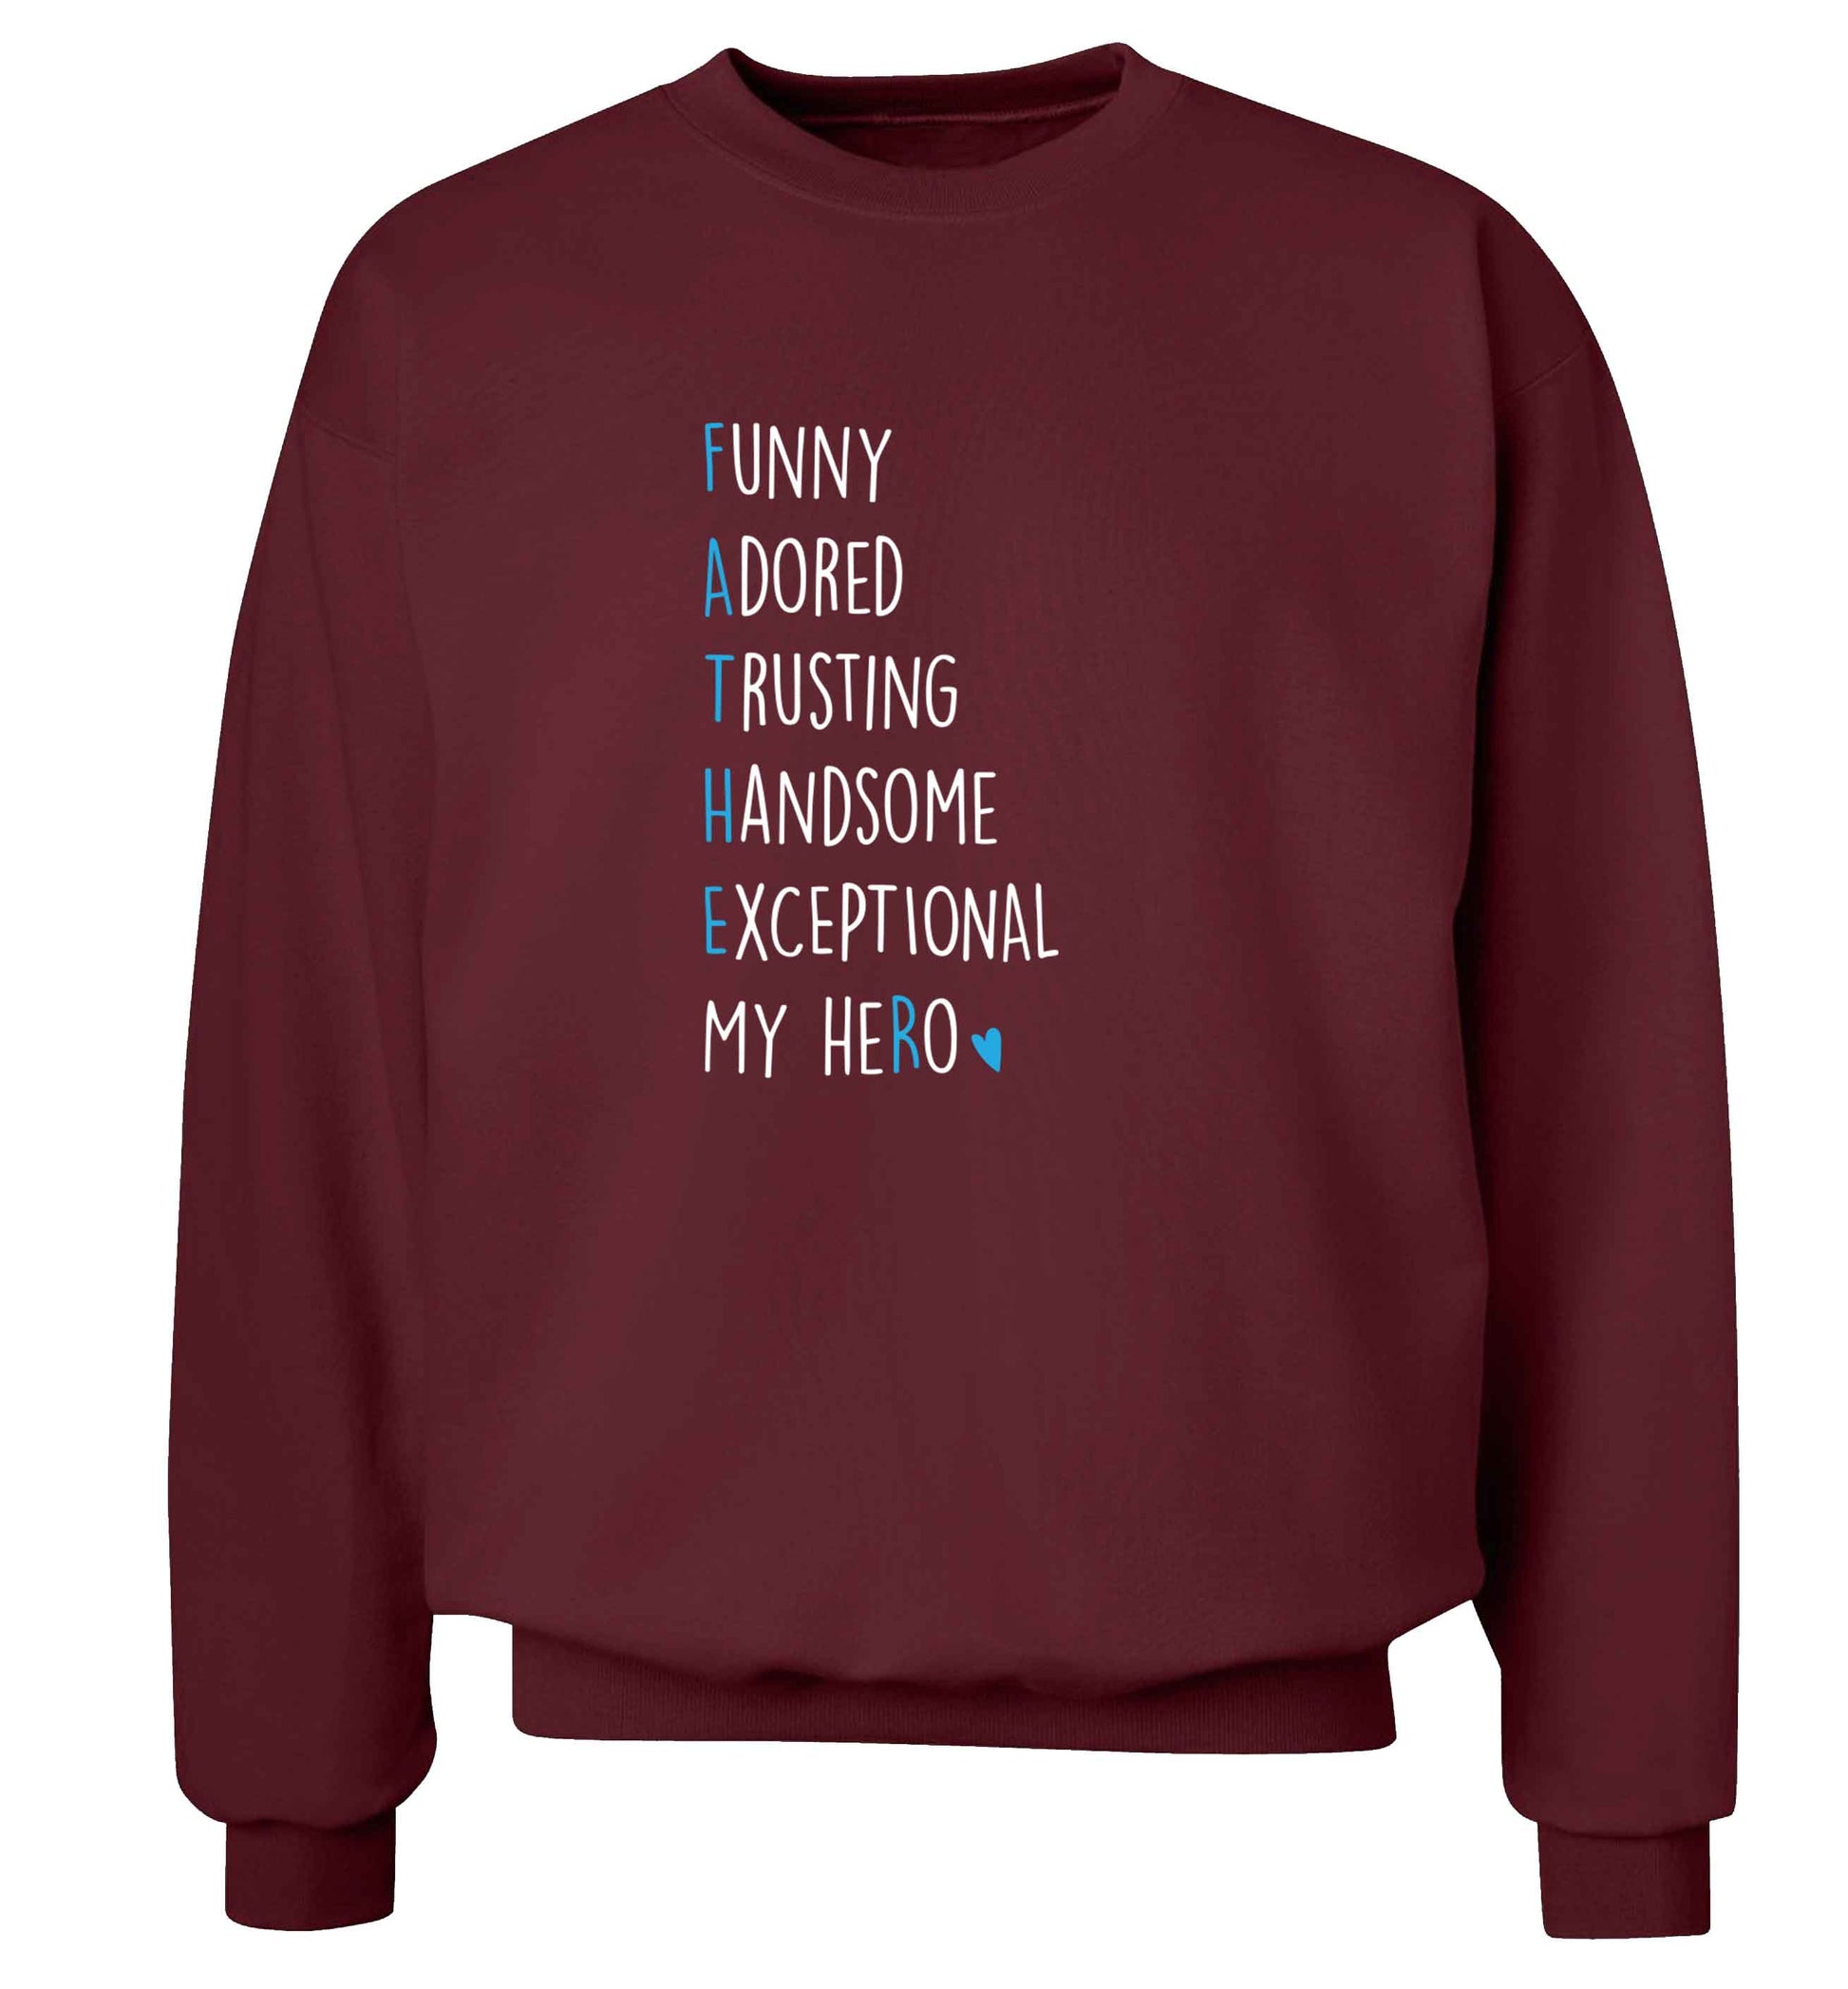 Father, funny adored trusting handsome exceptional my hero adult's unisex maroon sweater 2XL